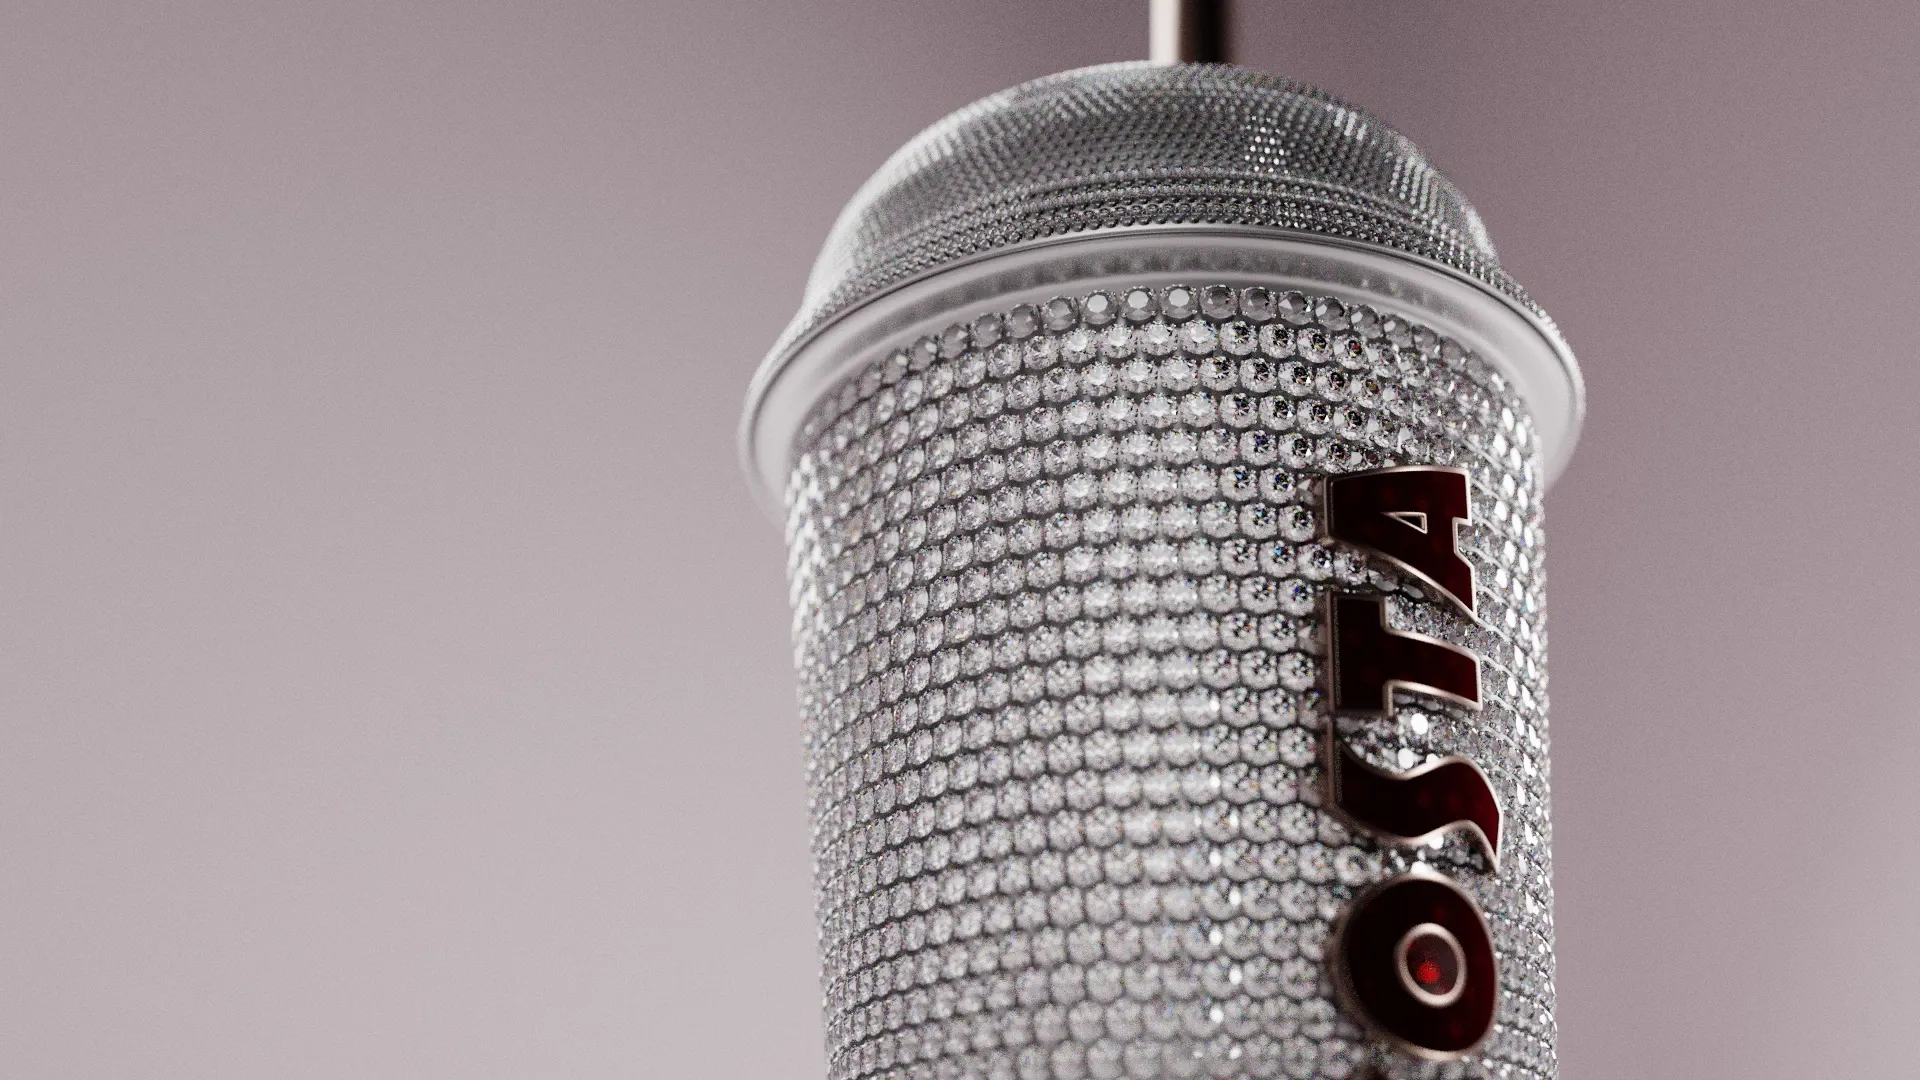 a rendered image of a close-up Costa Coffee cup in precious metal with diamonds